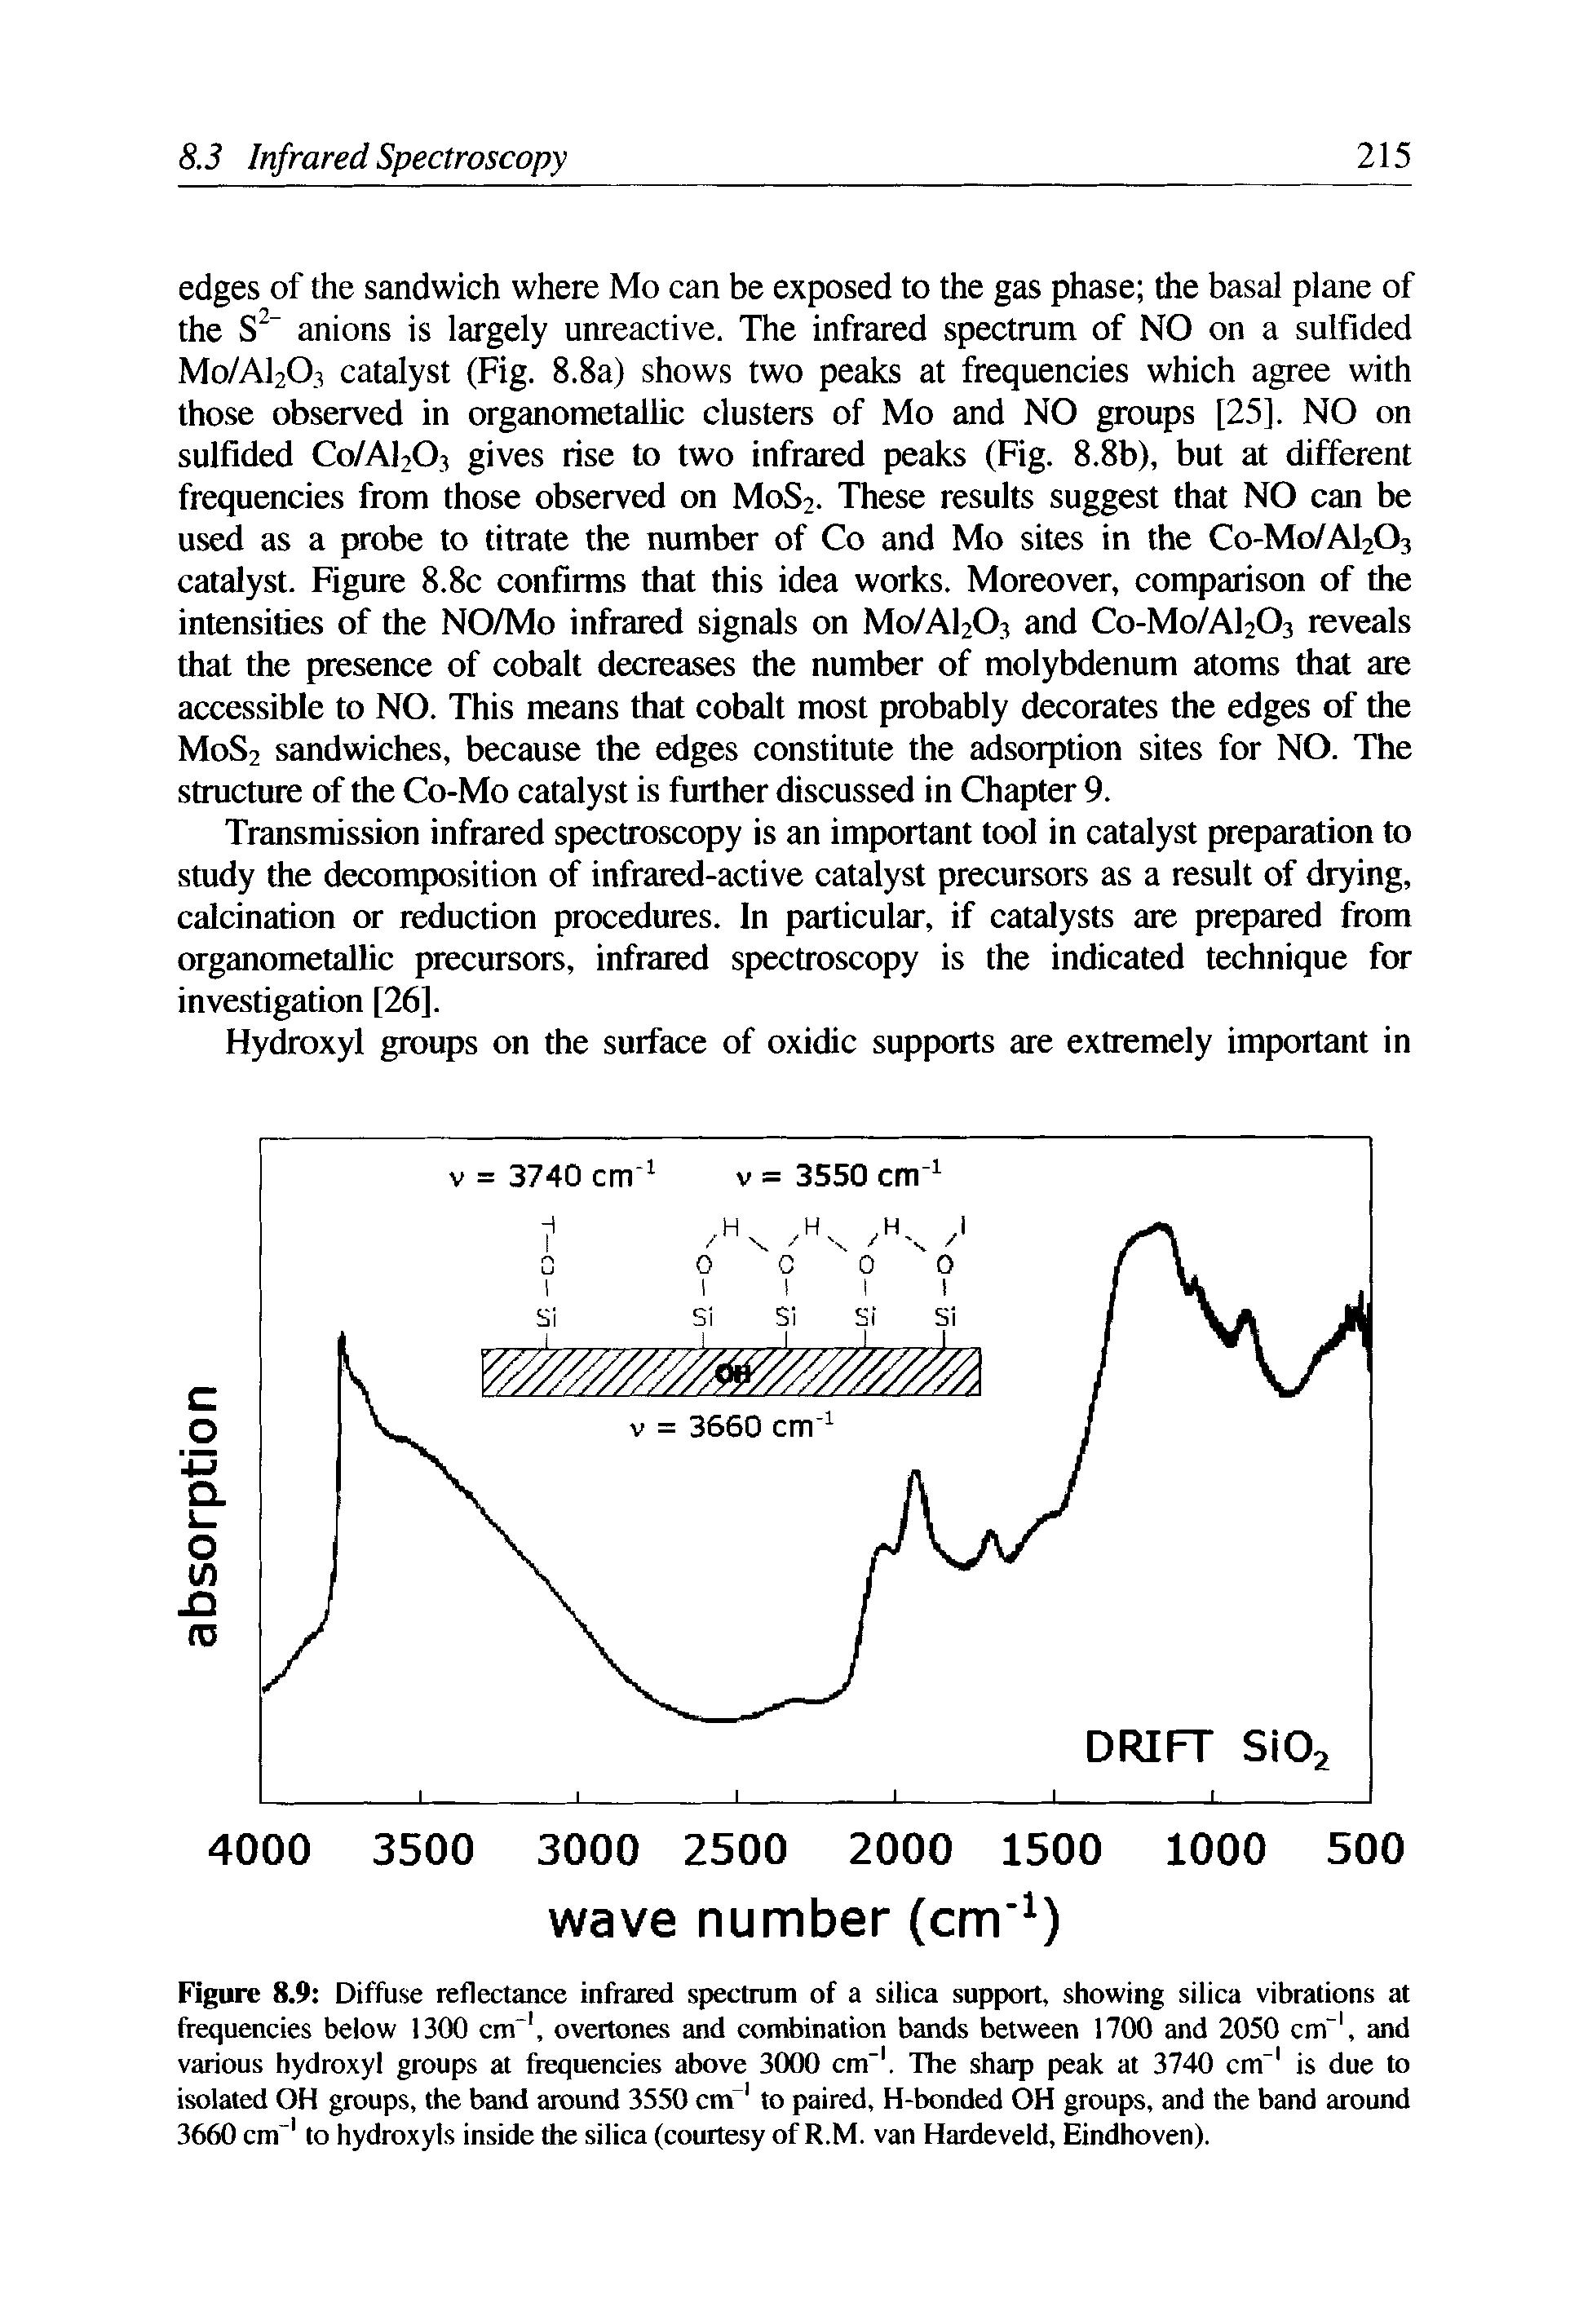 Figure 8.9 Diffuse reflectance infrared spectrum of a silica support, showing silica vibrations at frequencies below 1300 cm1, overtones and combination bands between 1700 and 2050 cm-1, and various hydroxyl groups at frequencies above 3000 cm 1. The sharp peak at 3740 cm"1 is due to isolated OH groups, the band around 3550 cm 1 to paired, H-bonded OH groups, and the band around 3660 cm 1 to hydroxyls inside the silica (courtesy of R.M. van Hardeveld, Eindhoven).